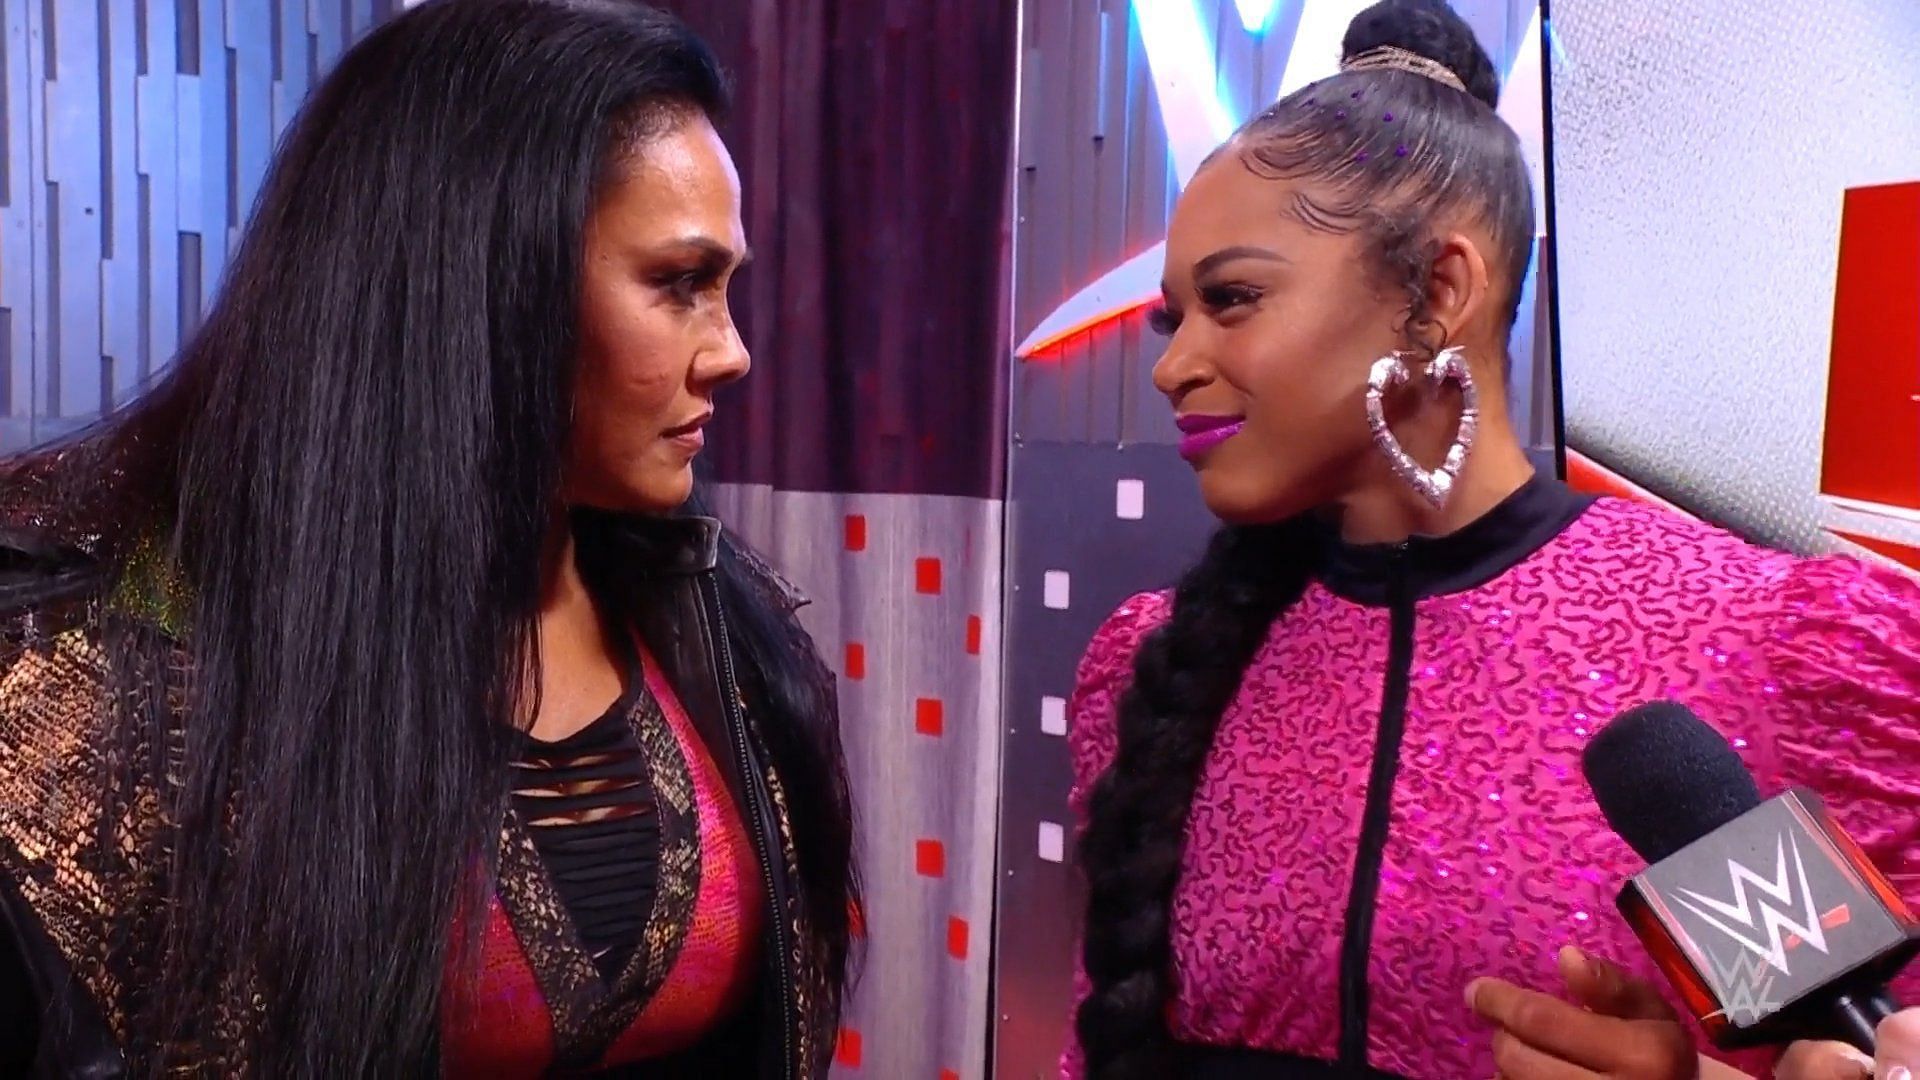 "I didn't even realize it" Former WWE personality who Tamina